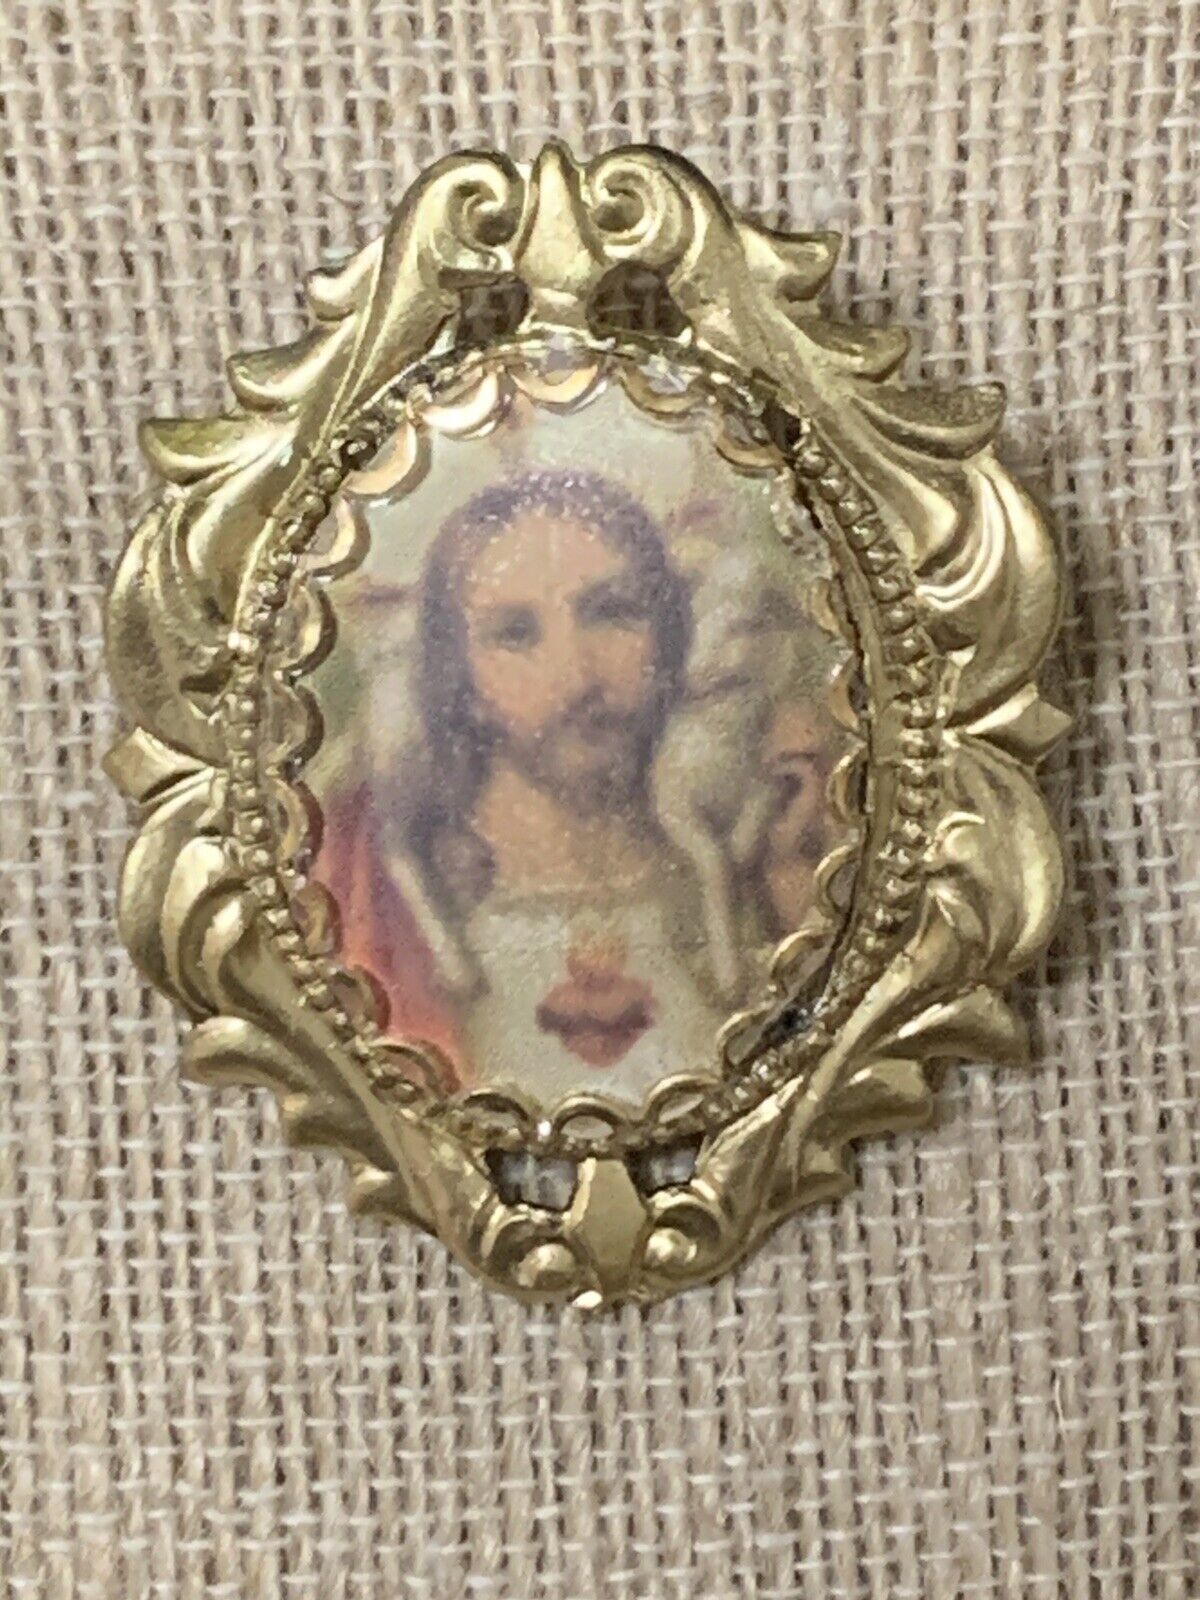 NEW*LG. FRENCH REPRODUCTION SACRED HEART JESUS W/LAMB CAMEO BROOCH.G crown bezel